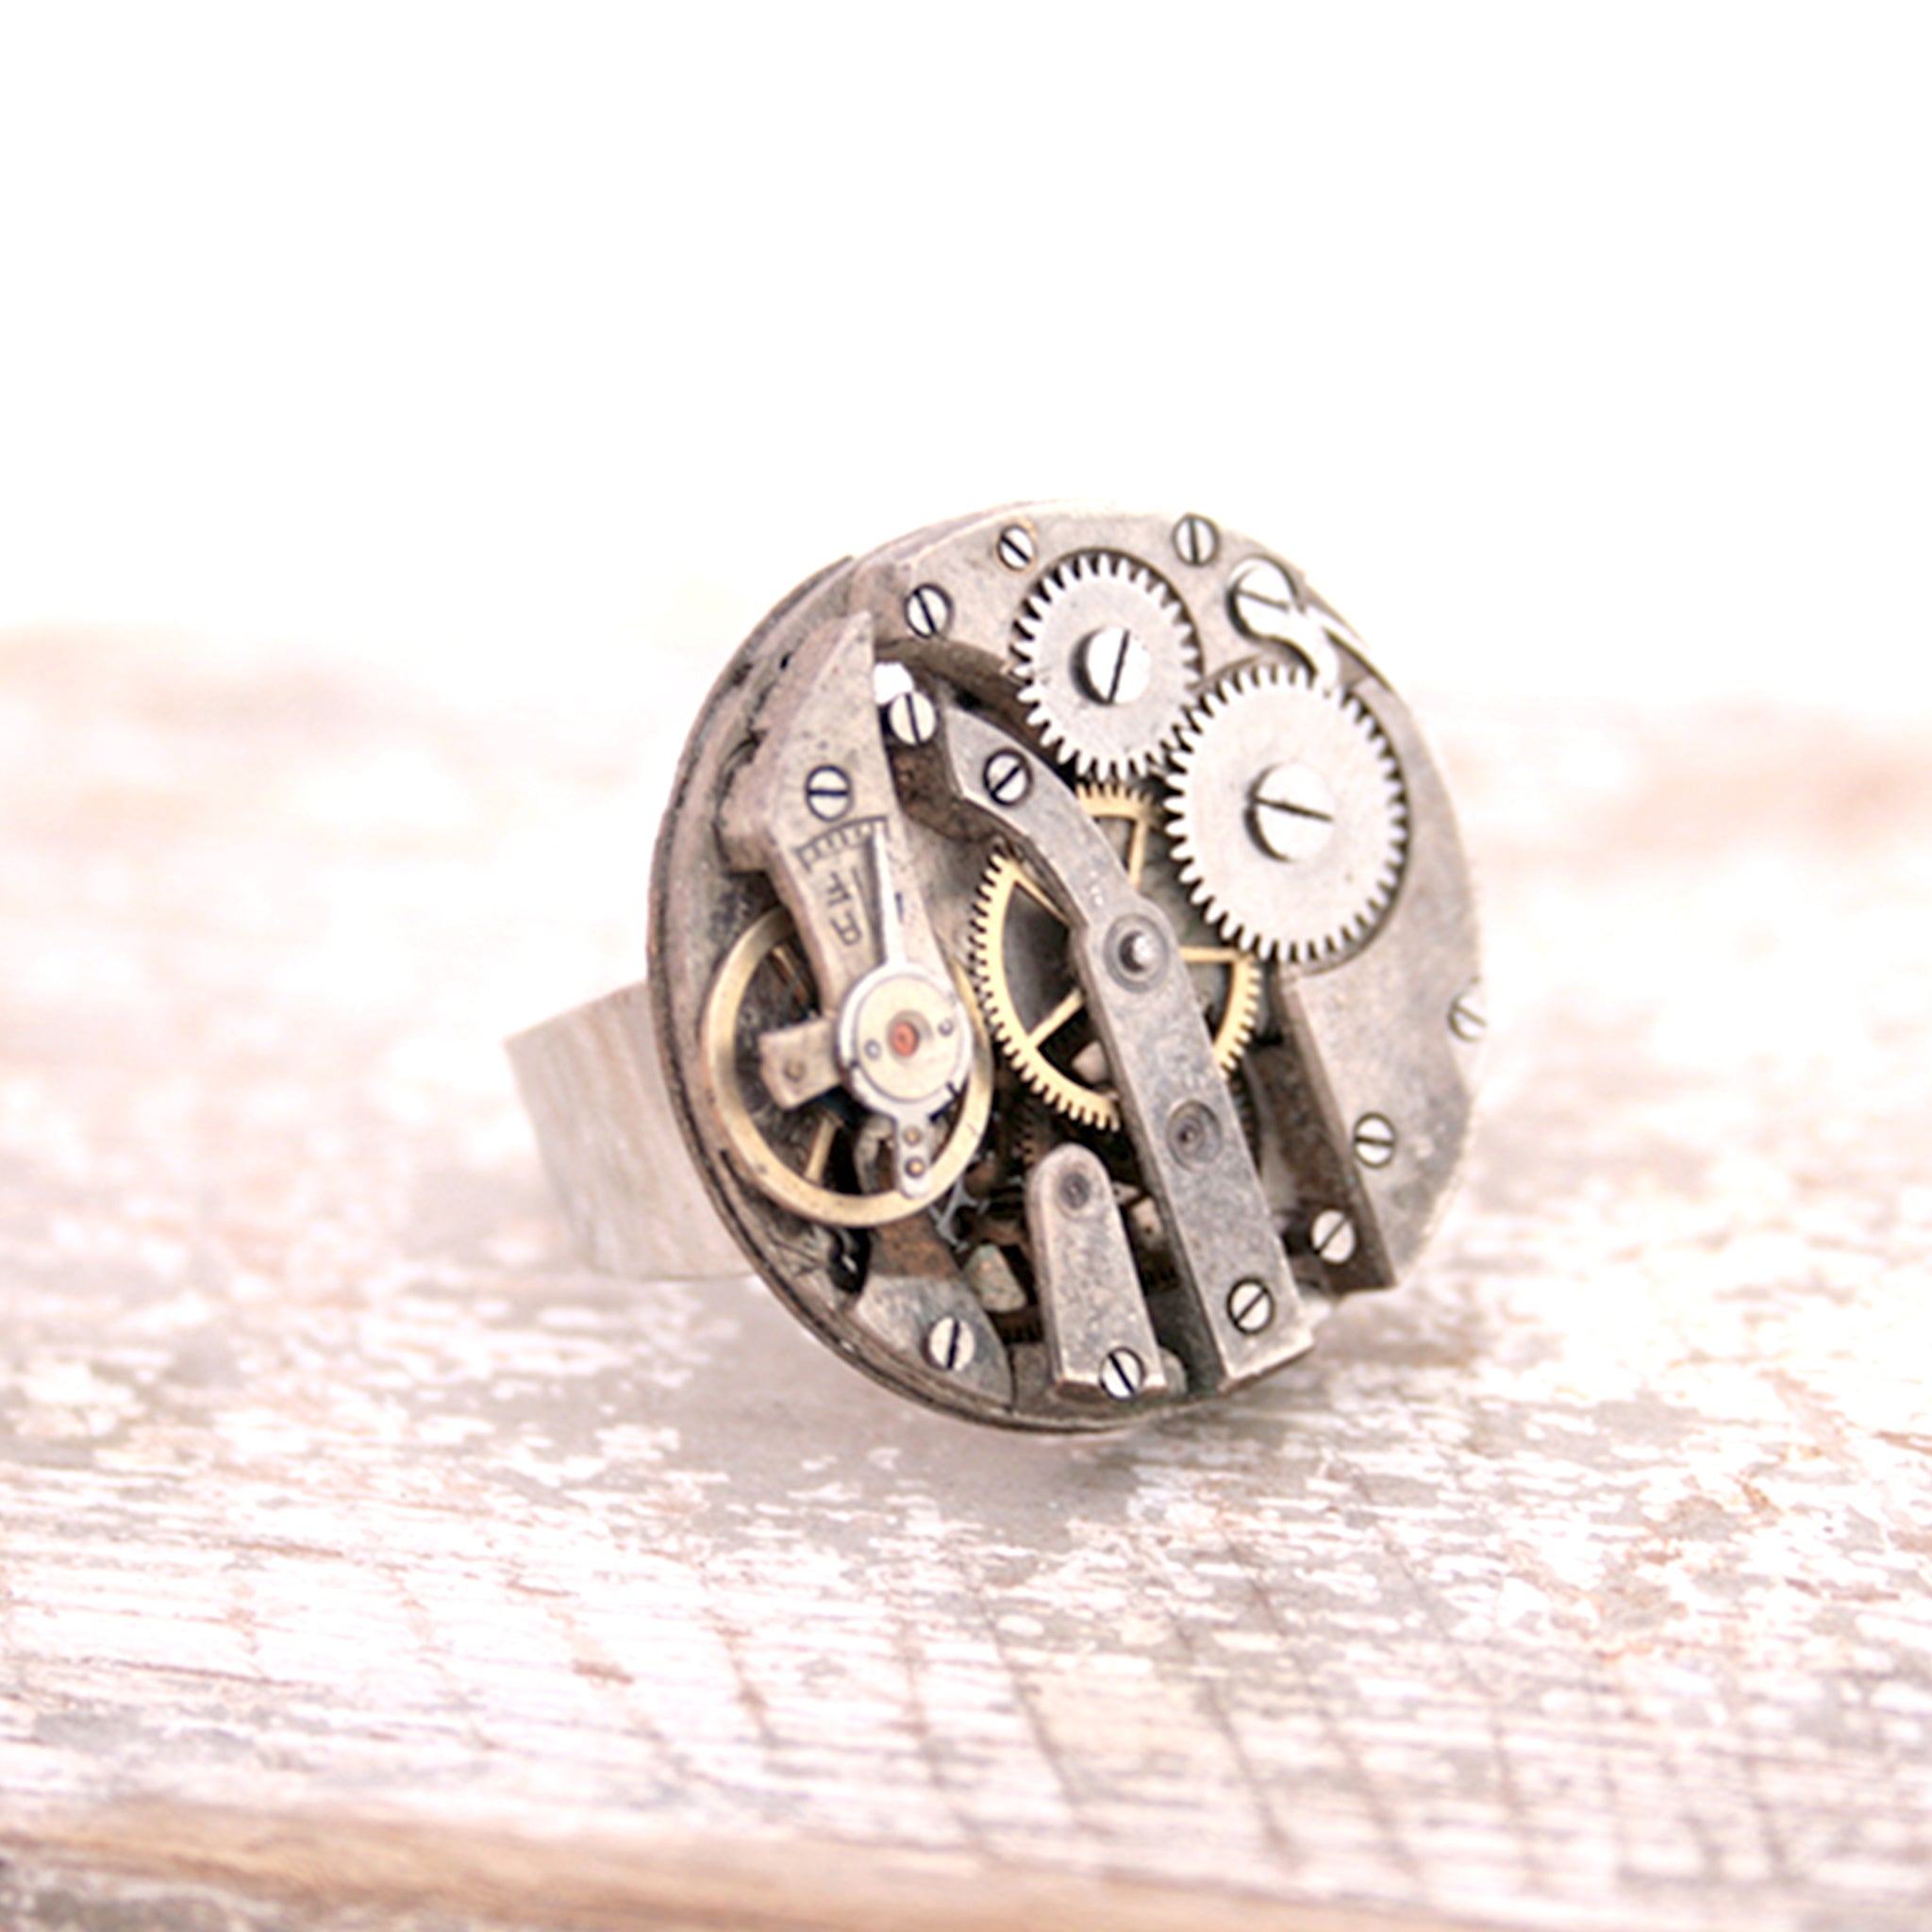 Gothic Ring in Old Silver made of watch mechanism